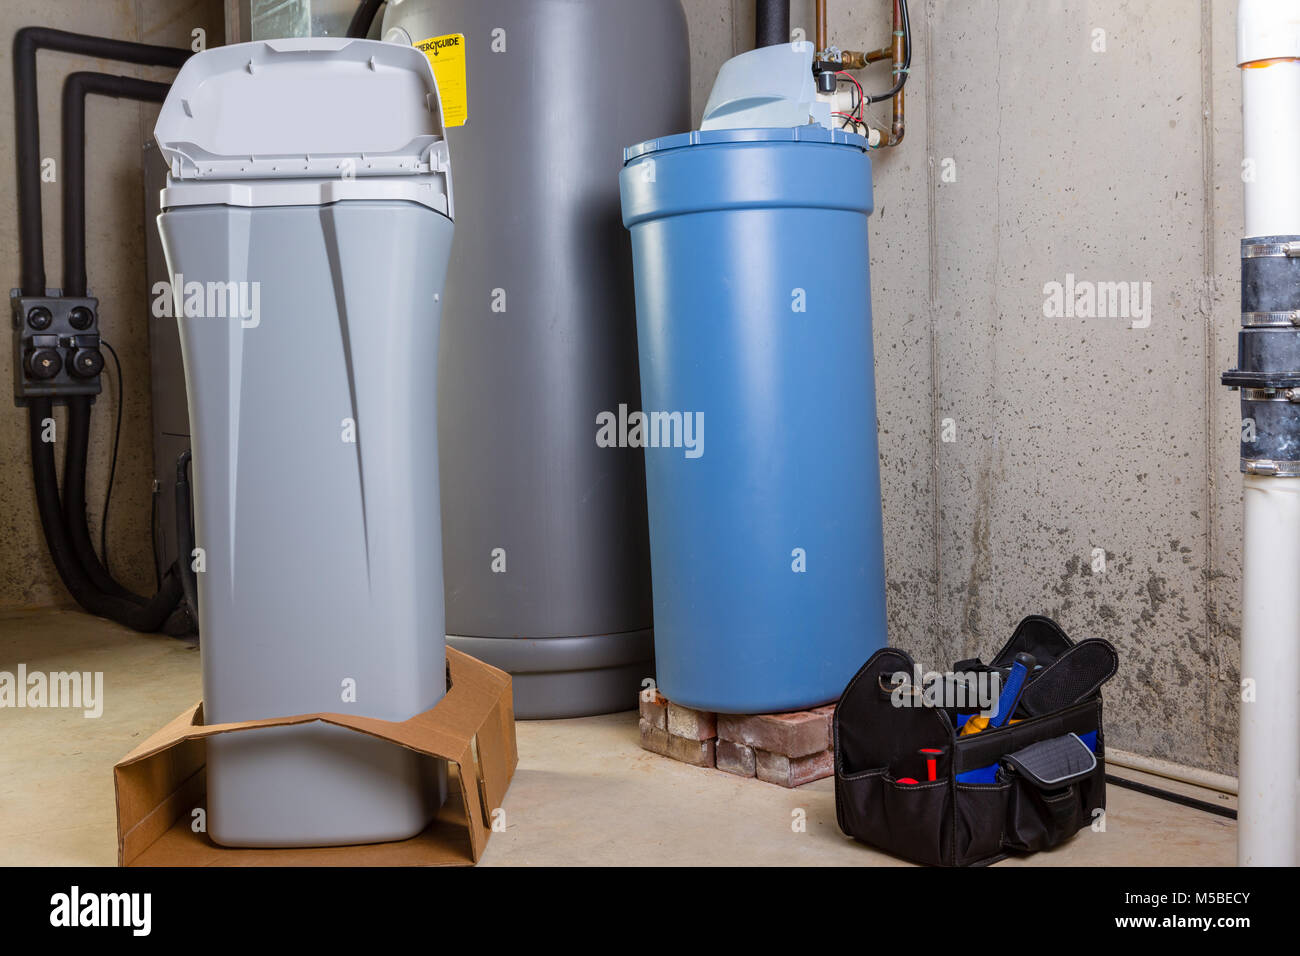 New water softening unit or tank ready alongside the old one for installation to replace it in a utility room with a portable tool kit in a box on the Stock Photo